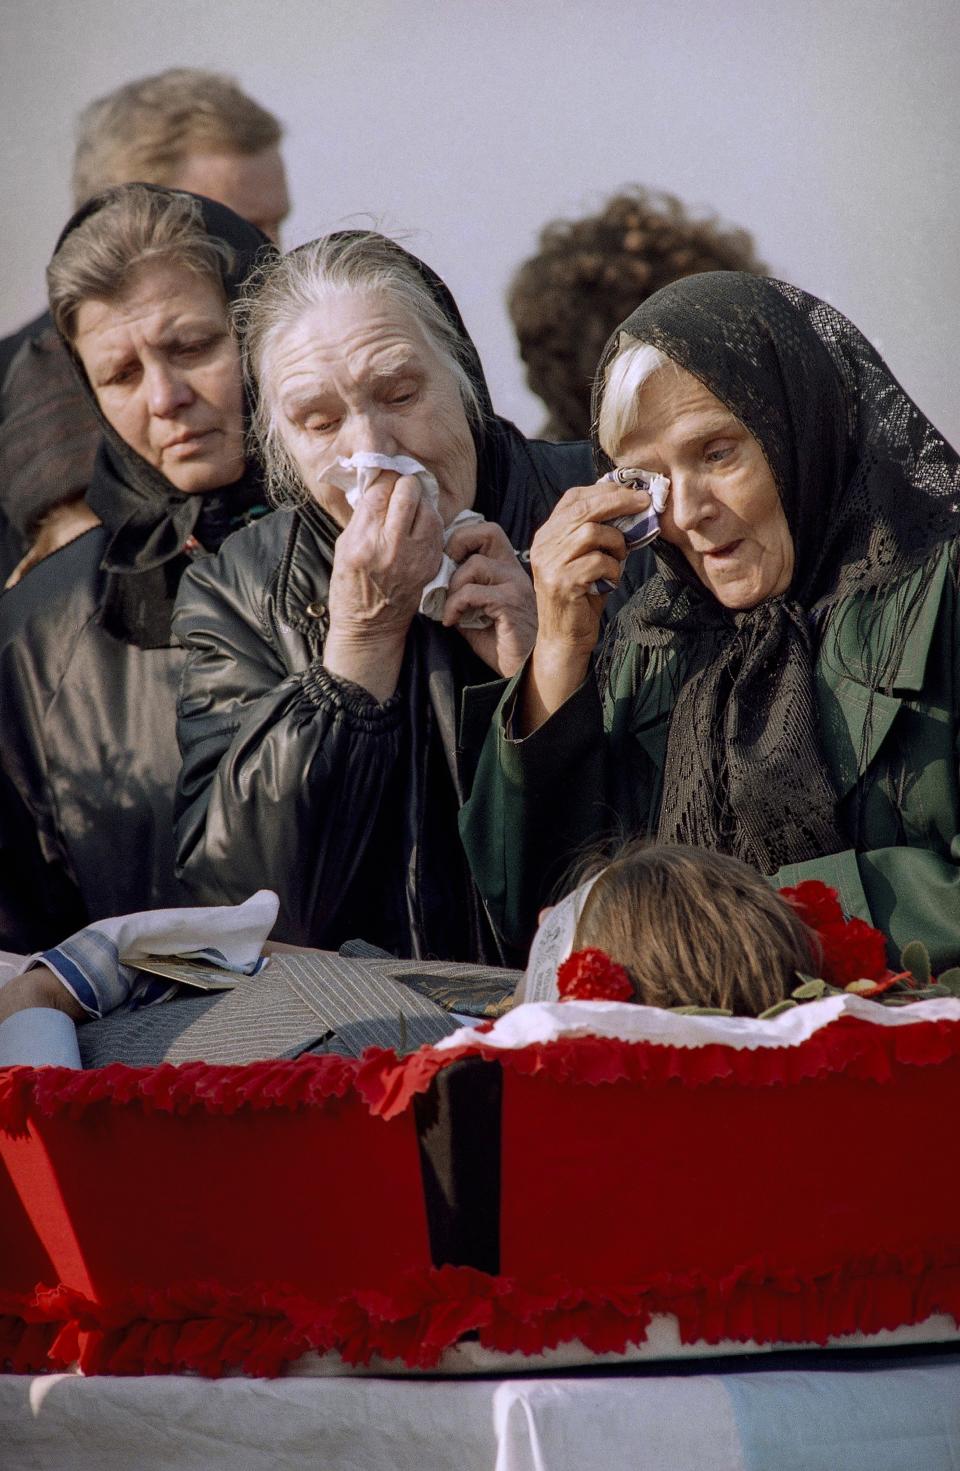 FILE - Relatives of Viktor Gogolev, 26, a civilian killed by a stray bullet near the Russian parliament building, the White House on Monday, cry as they pay their last respects at the Khovanskoe cemetery in Moscow's suburbs, on Oct. 8, 1993. The October 1993 violent showdown between the Kremlin and supporters of the rebellious parliament marked a watershed in Russia's post-Soviet history. (AP Photo/Alexander Zemlianichenko, File)